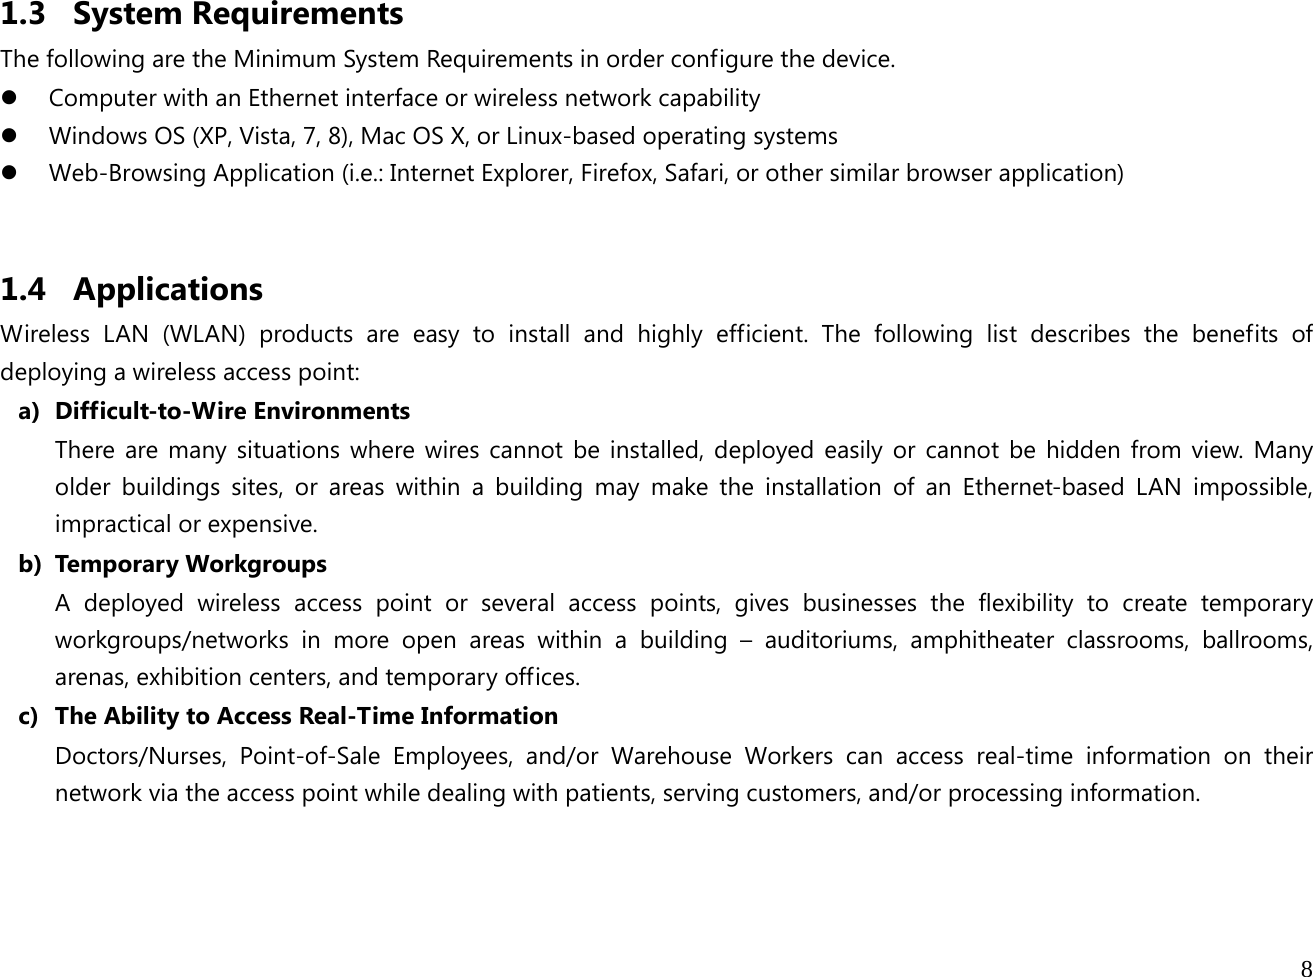  8  1.3 System Requirements The following are the Minimum System Requirements in order configure the device. z Computer with an Ethernet interface or wireless network capability z Windows OS (XP, Vista, 7, 8), Mac OS X, or Linux-based operating systems z Web-Browsing Application (i.e.: Internet Explorer, Firefox, Safari, or other similar browser application)  1.4 Applications Wireless LAN (WLAN) products are easy to install and highly efficient. The following list describes the benefits of deploying a wireless access point: a) Difficult-to-Wire Environments There are many situations where wires cannot be installed, deployed easily or cannot be hidden from view. Many older buildings sites, or areas within a building may make the installation of an Ethernet-based LAN impossible, impractical or expensive. b) Temporary Workgroups A deployed wireless access point or several access points, gives businesses the flexibility to create temporary workgroups/networks in more open areas within a building – auditoriums, amphitheater classrooms, ballrooms, arenas, exhibition centers, and temporary offices. c) The Ability to Access Real-Time Information Doctors/Nurses, Point-of-Sale Employees, and/or Warehouse Workers can access real-time information on their network via the access point while dealing with patients, serving customers, and/or processing information.    